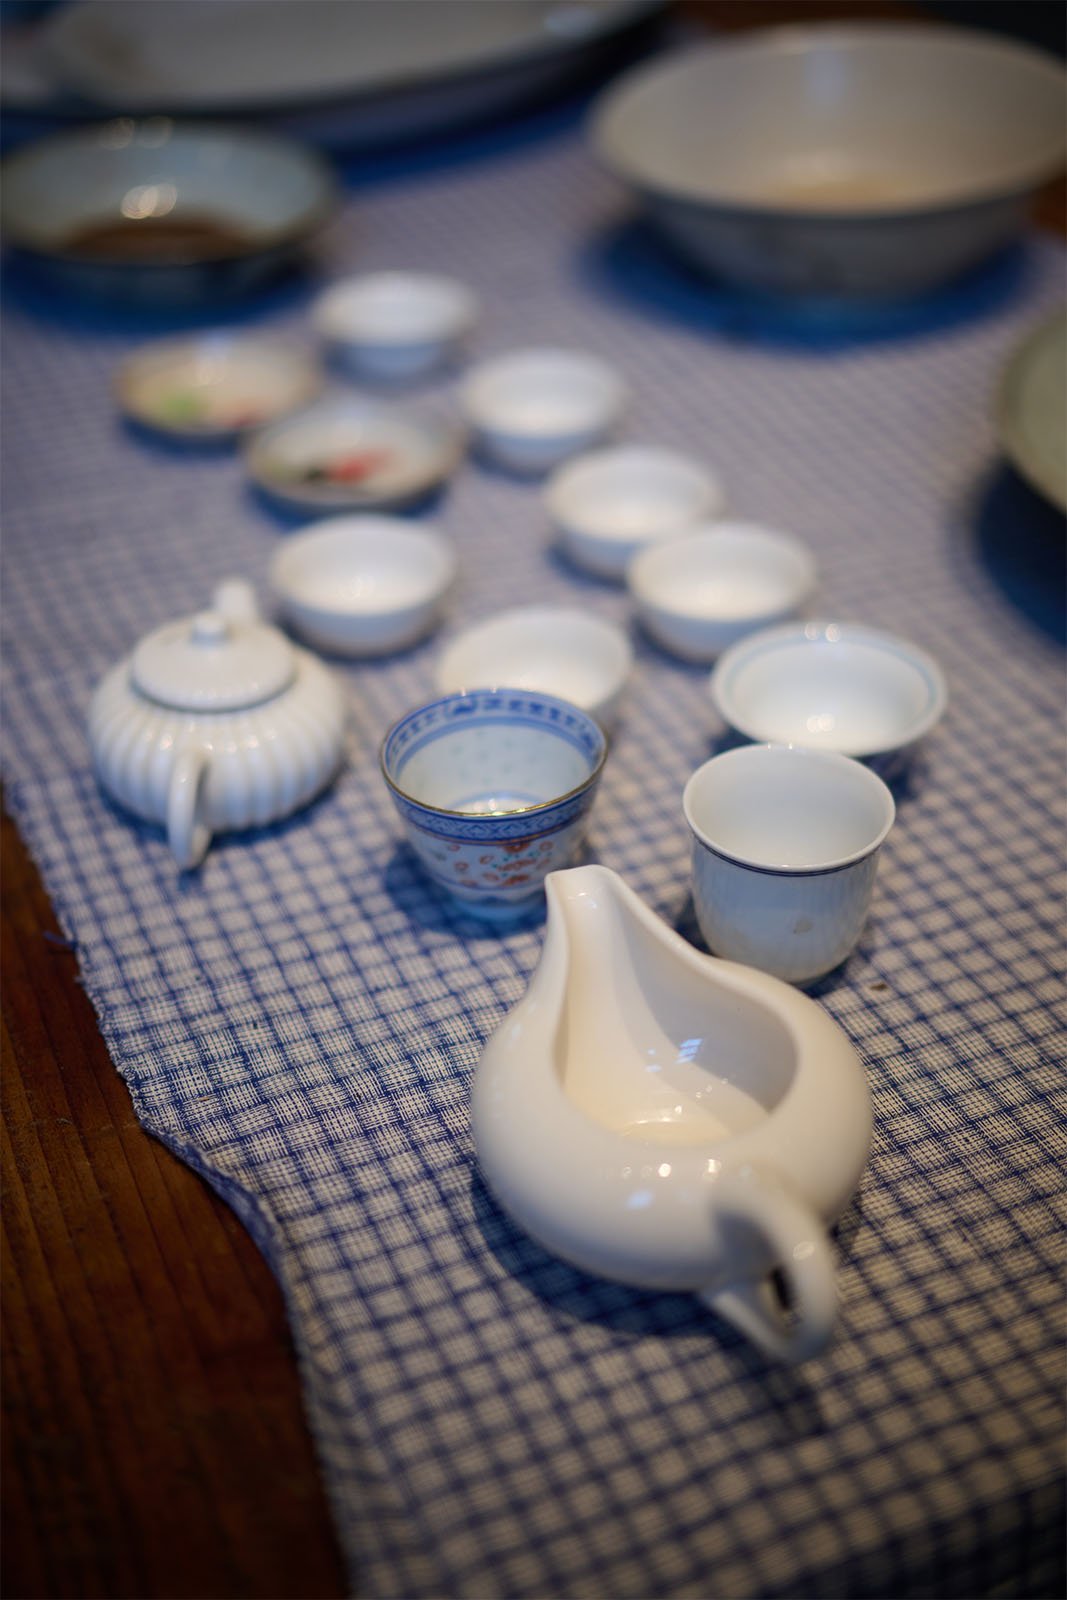 An elegant chinese tea set arranged on a blue and white checkered tablecloth, featuring a white teapot, several cups, and small dishes.